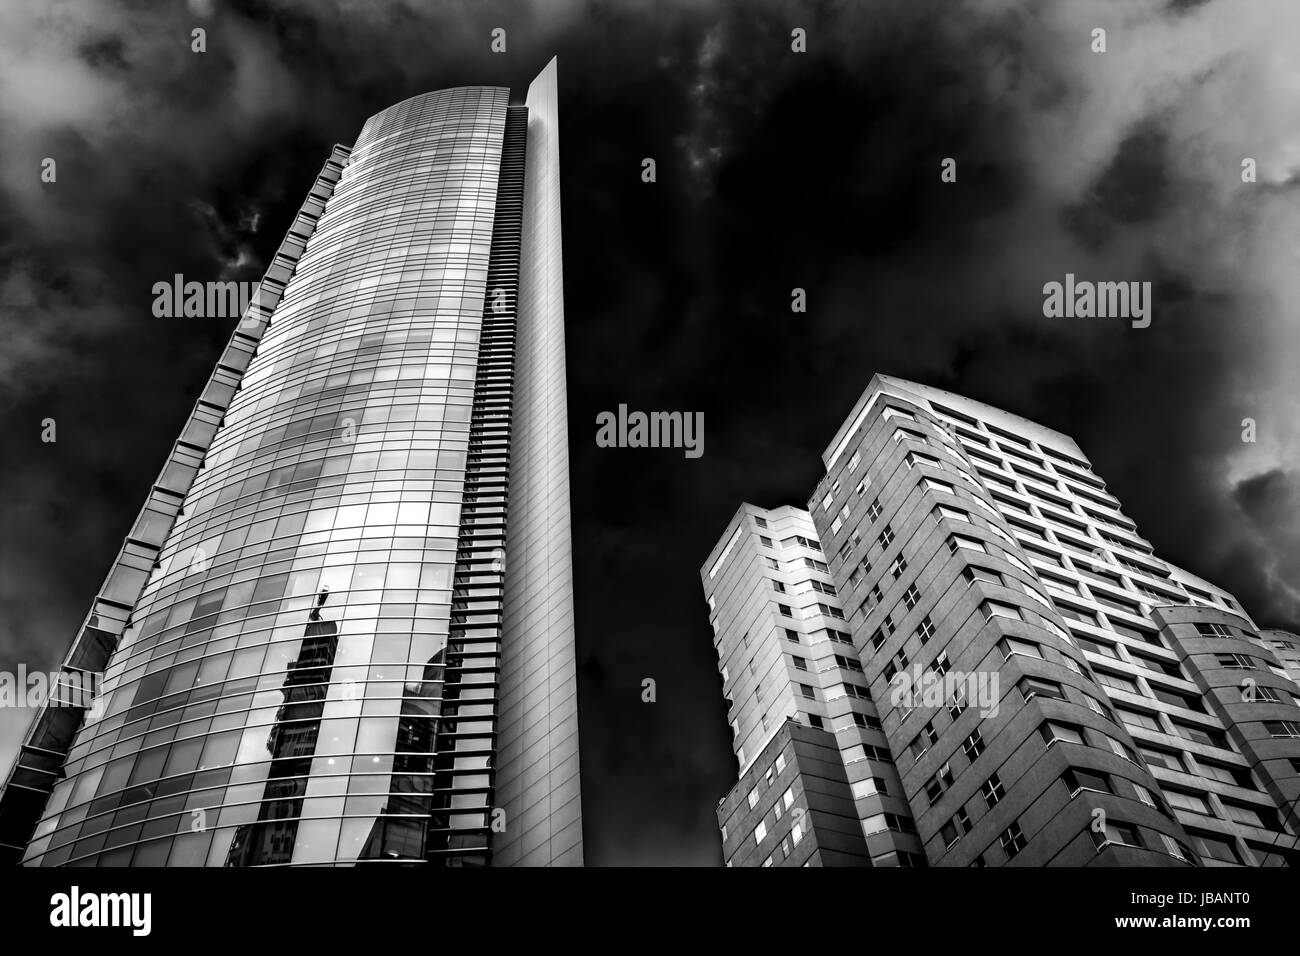 Couple of buildings in high contrast black and white. Stock Photo